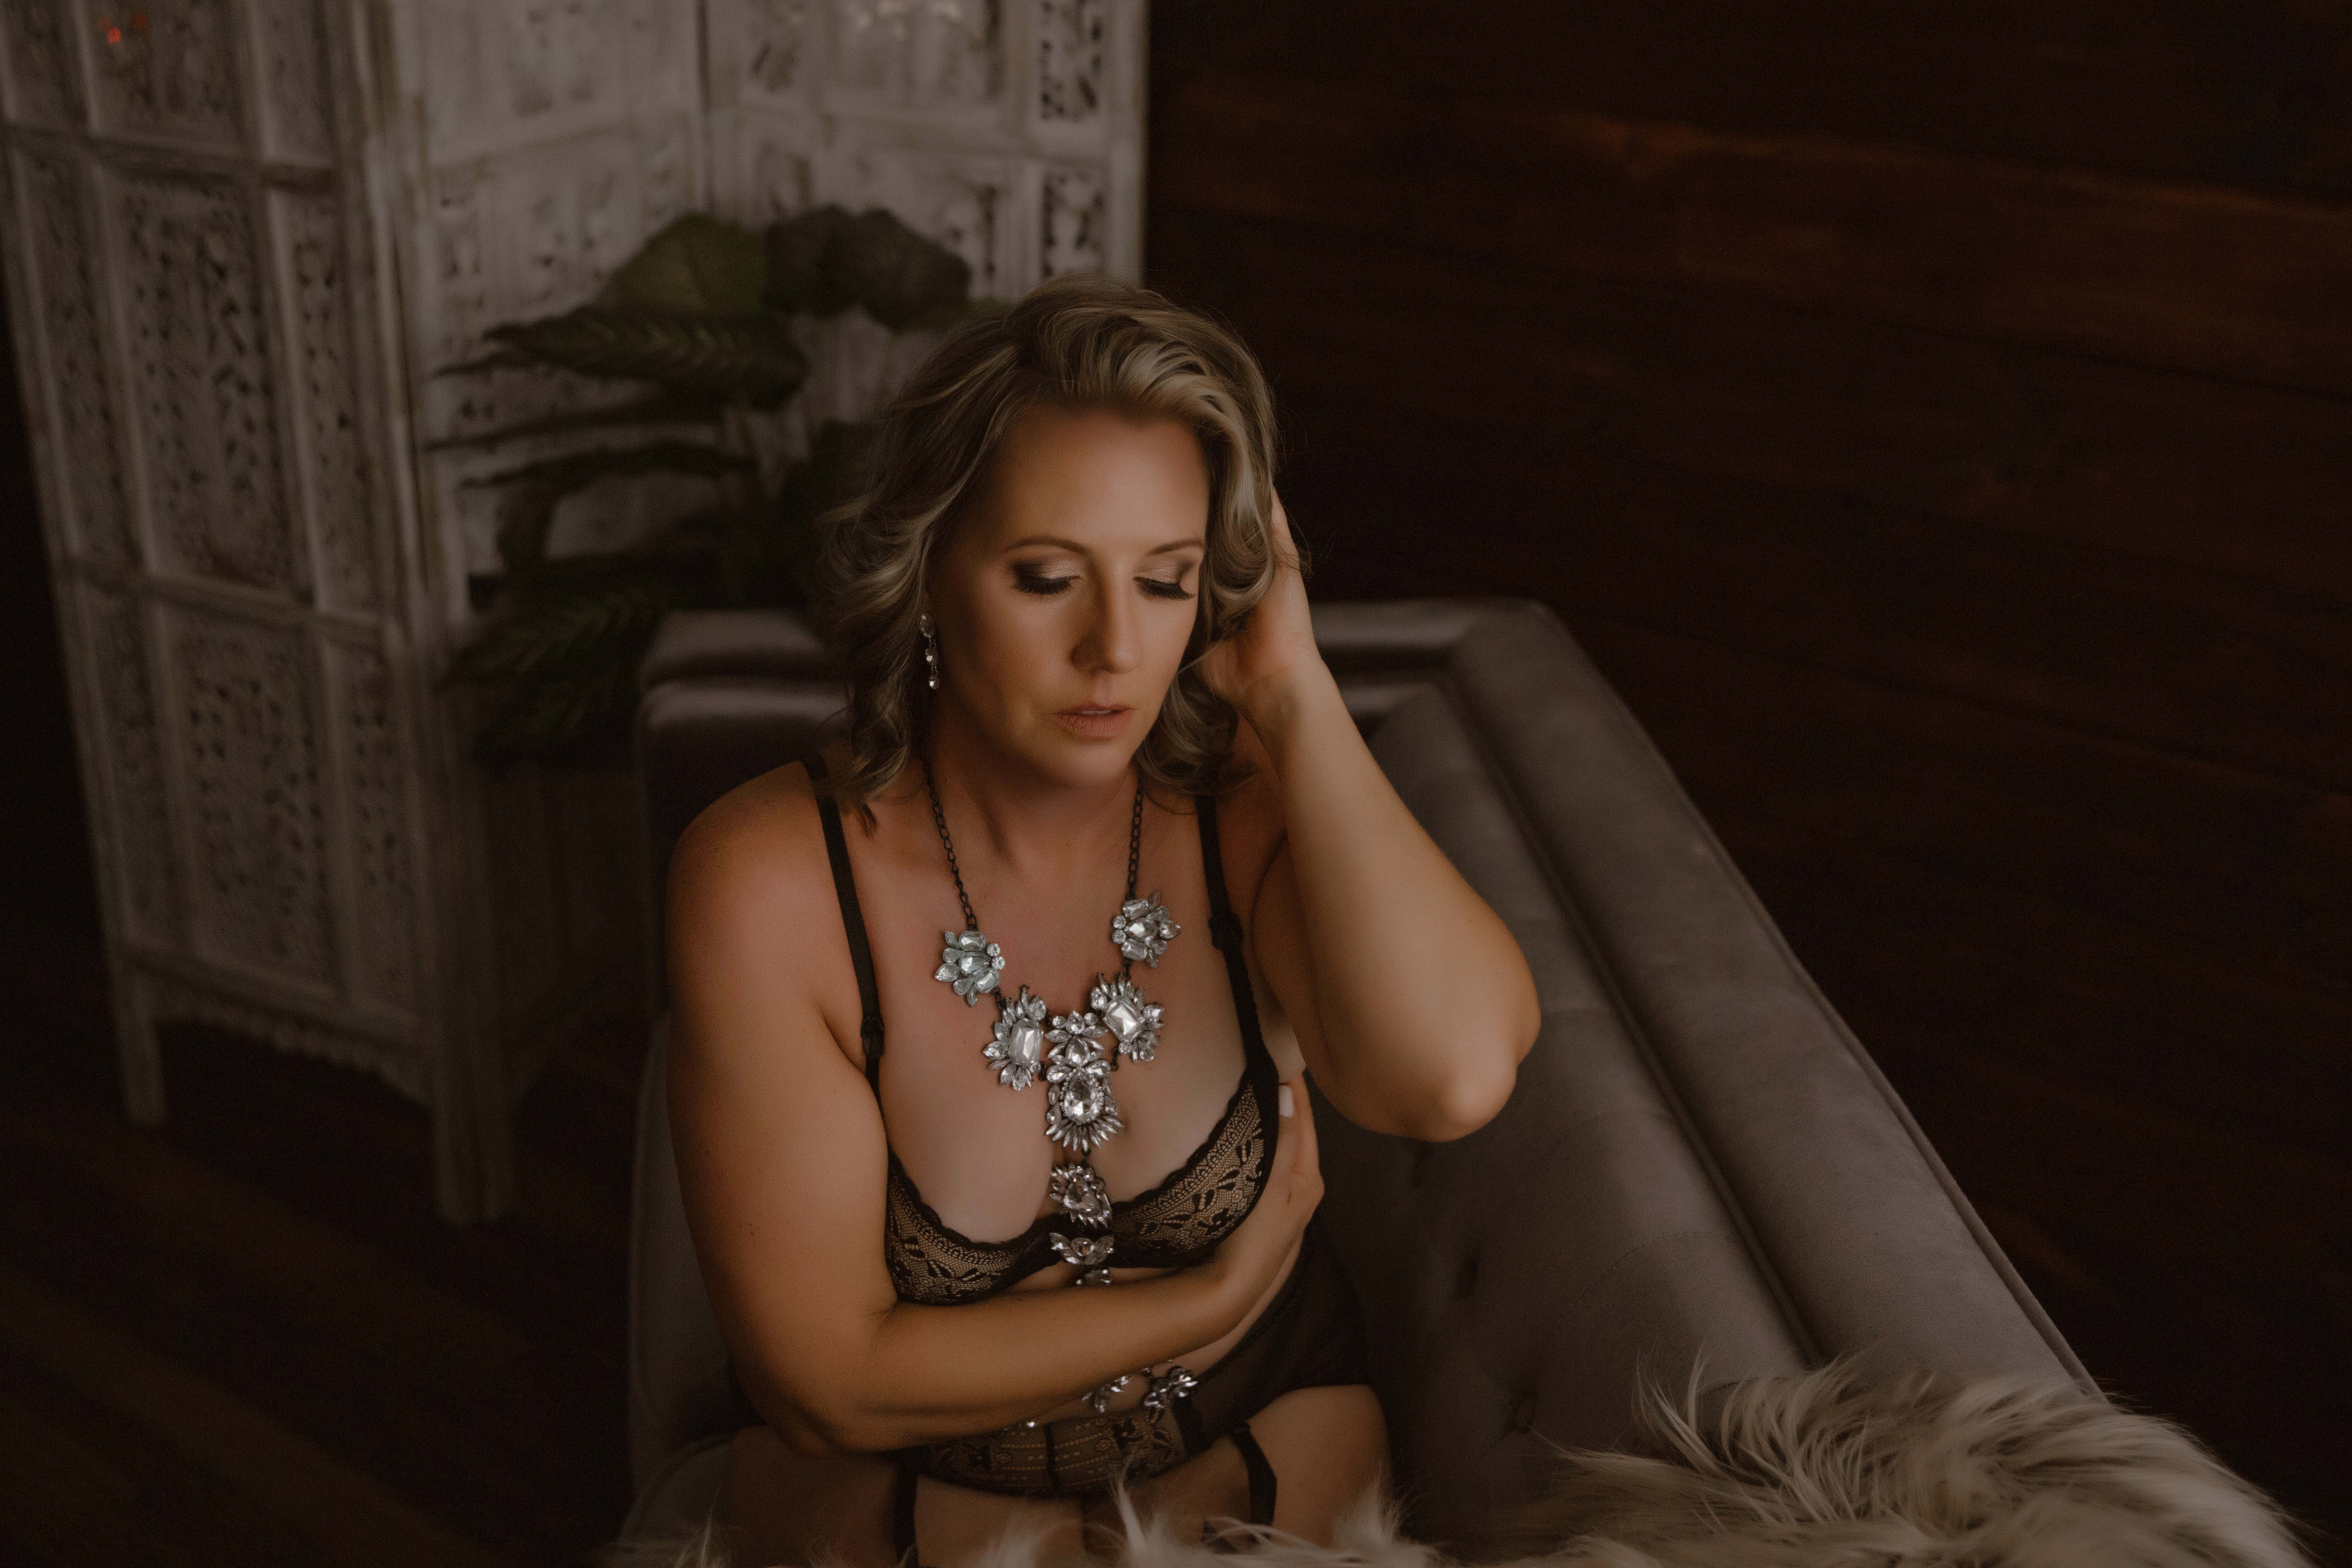 Indoor boudoir photo session of a blonde woman sitting on the couch wearing a black lingerie set